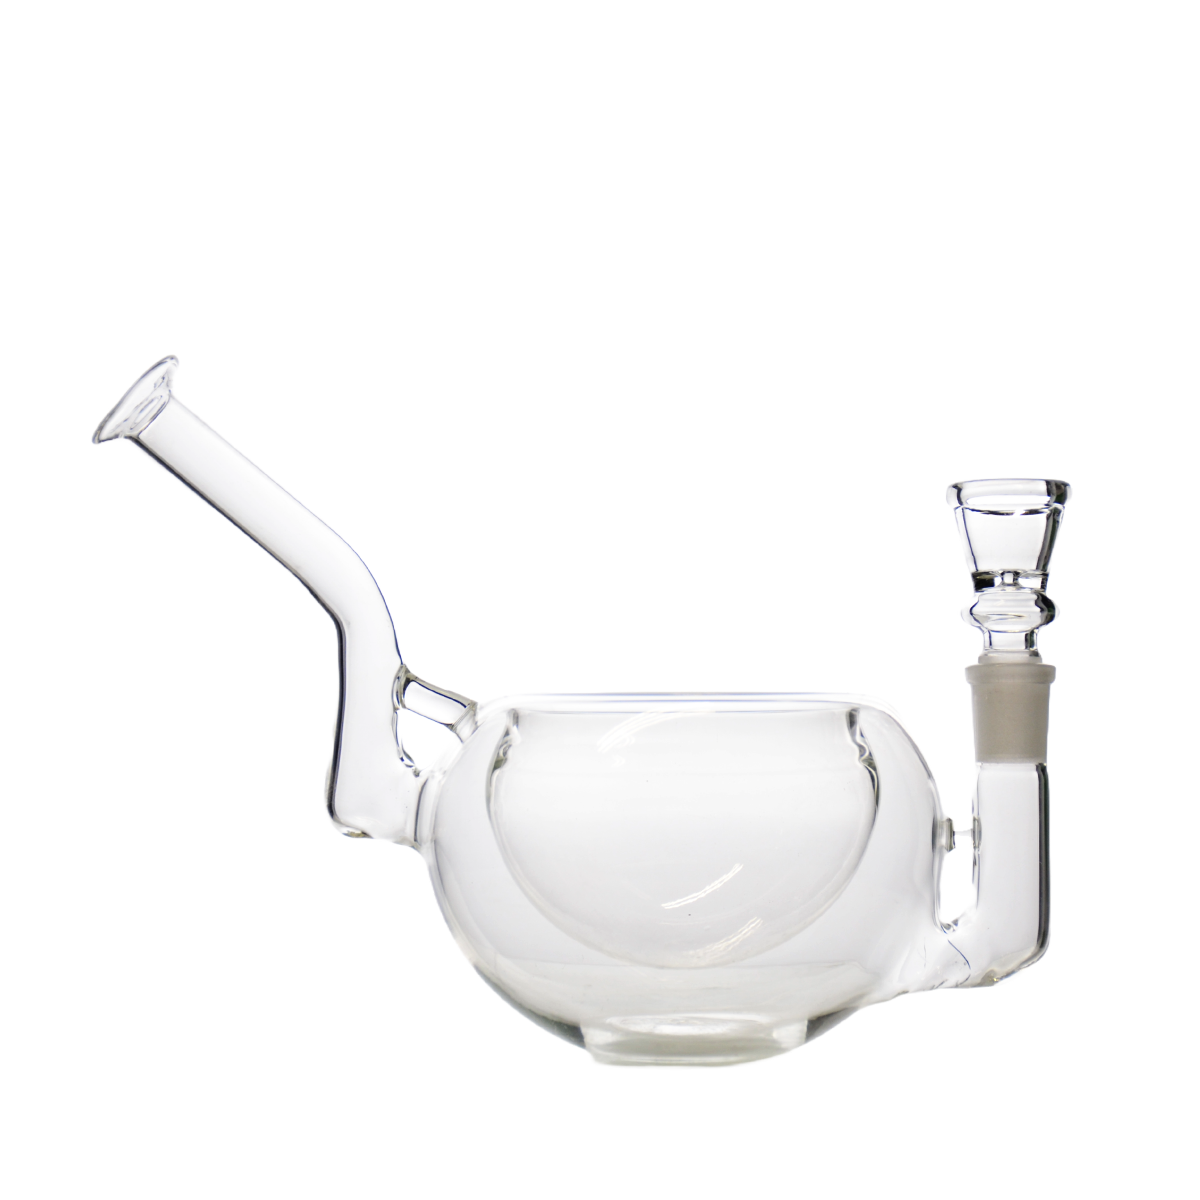 8" Glass Cereal Bowl with 14mm Male Bowl